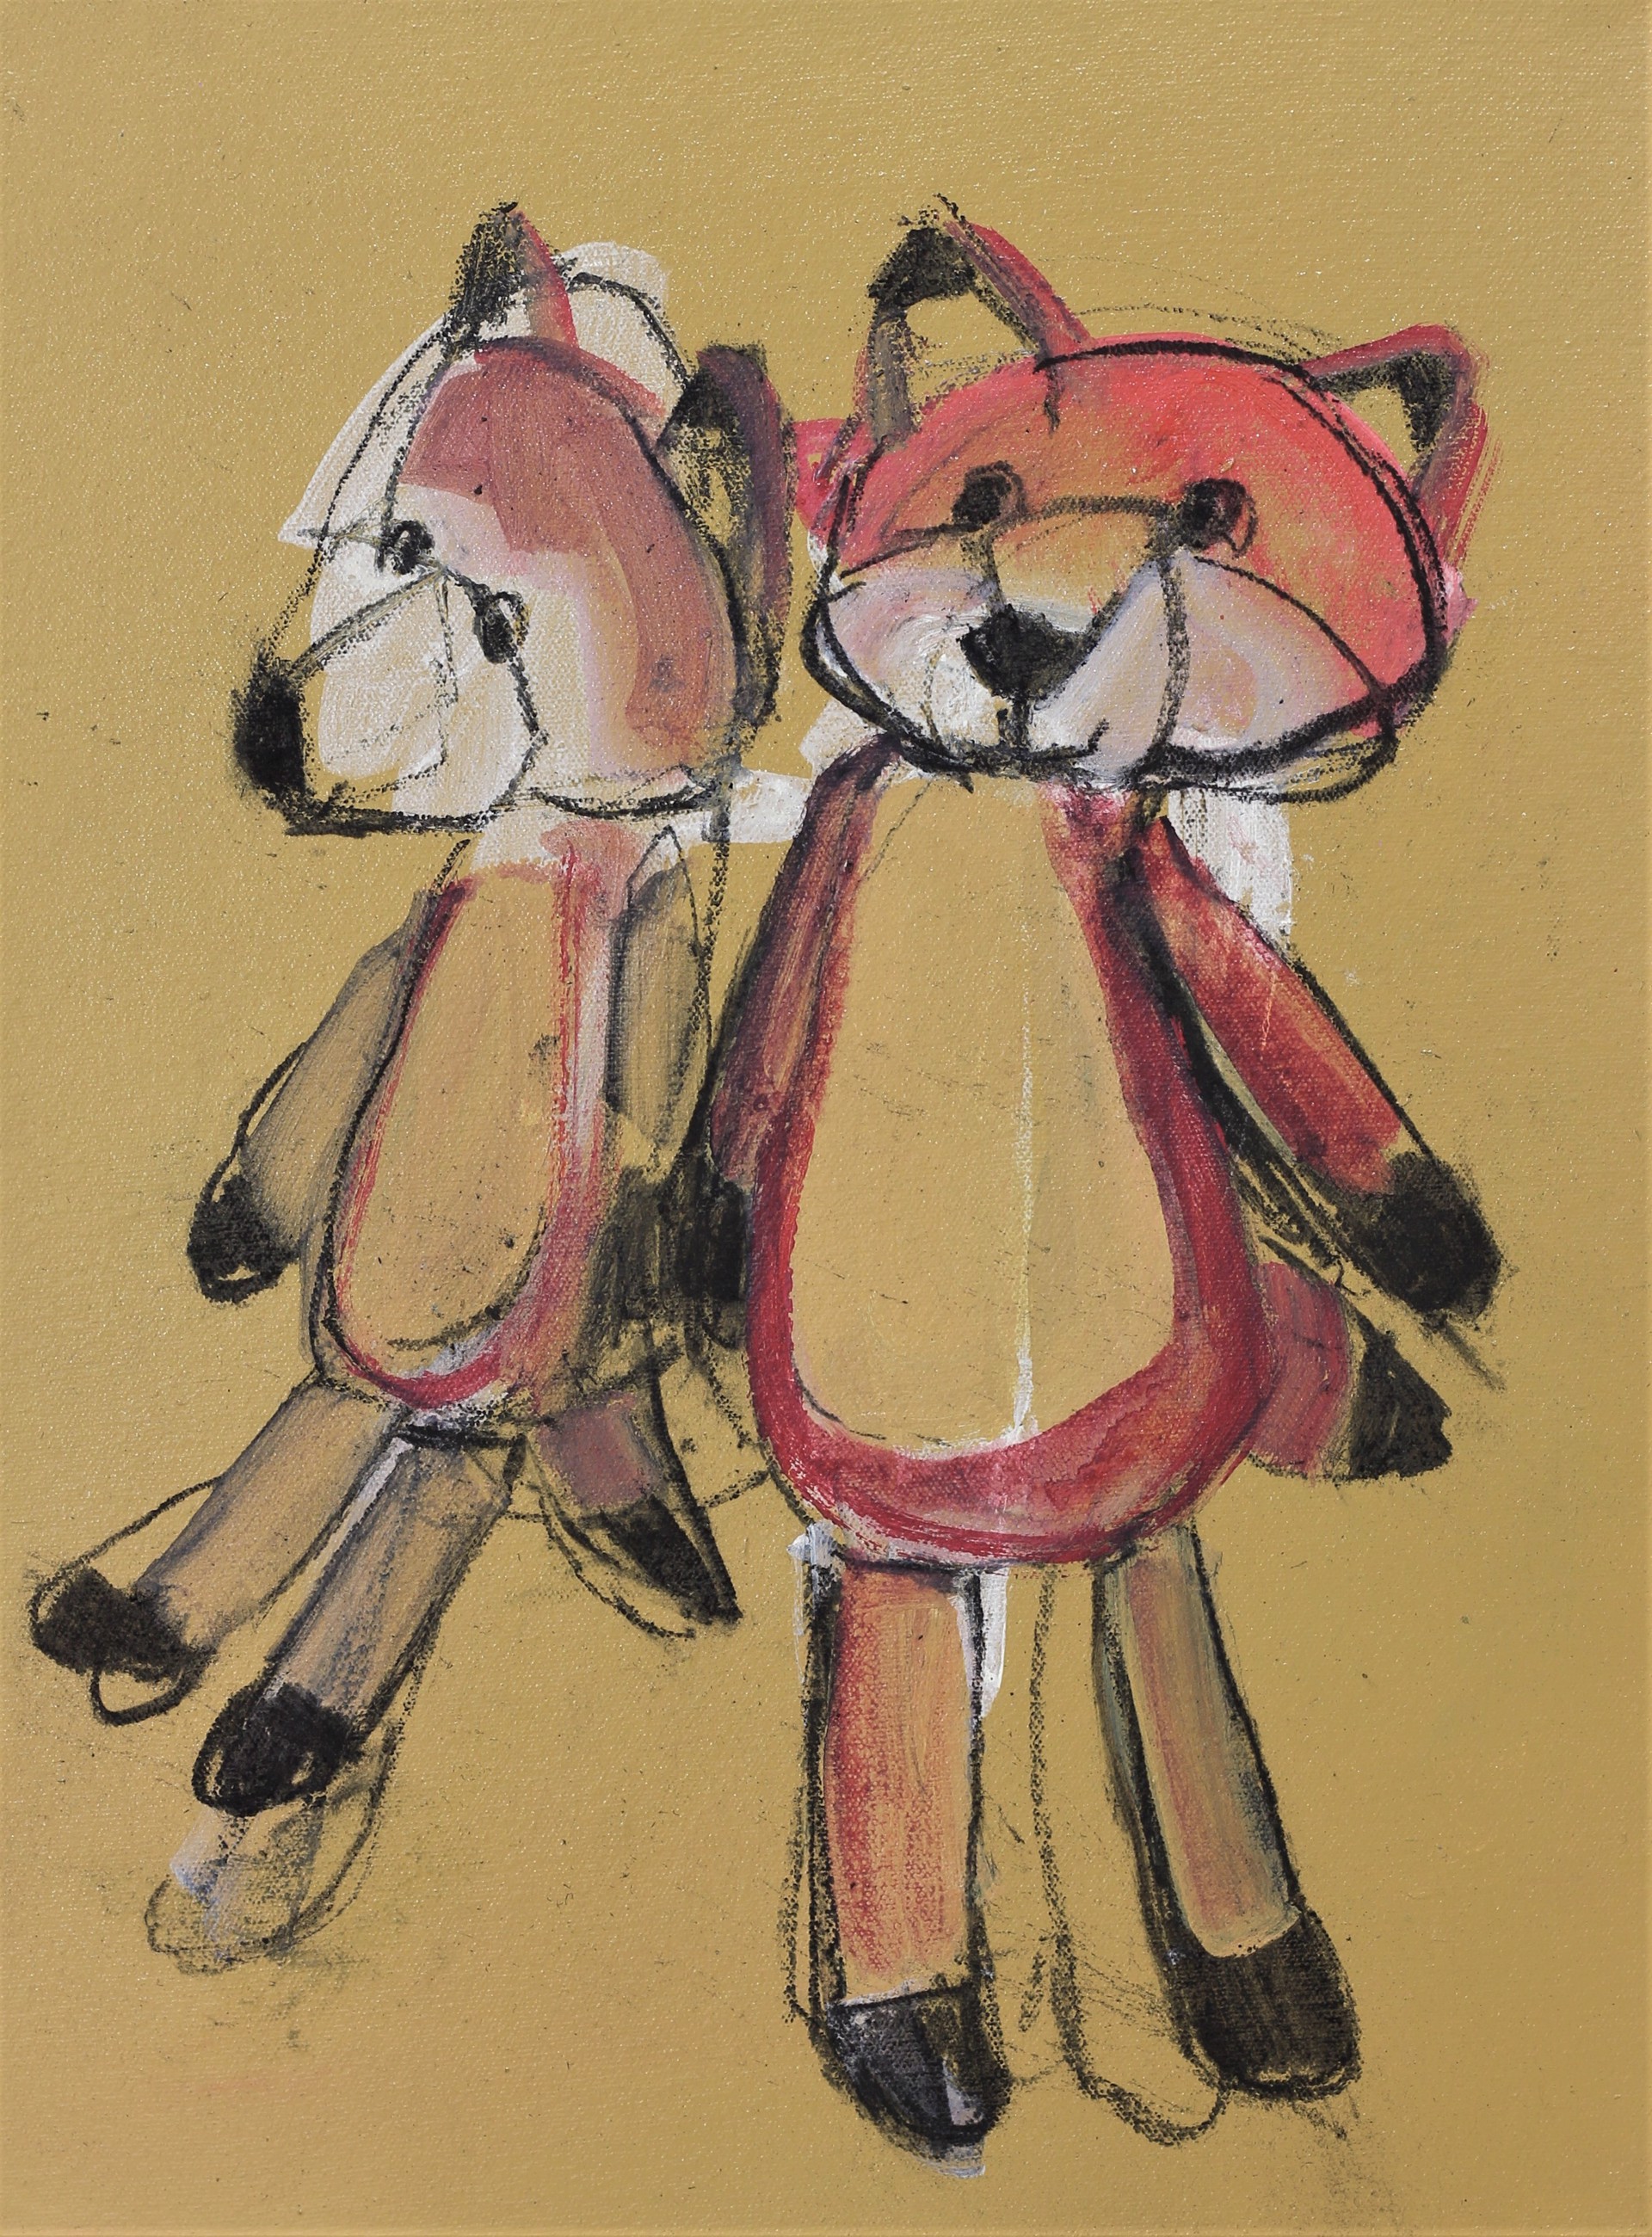 MR AND MRS FOX by CHRISTINA THWAITES (Figures)